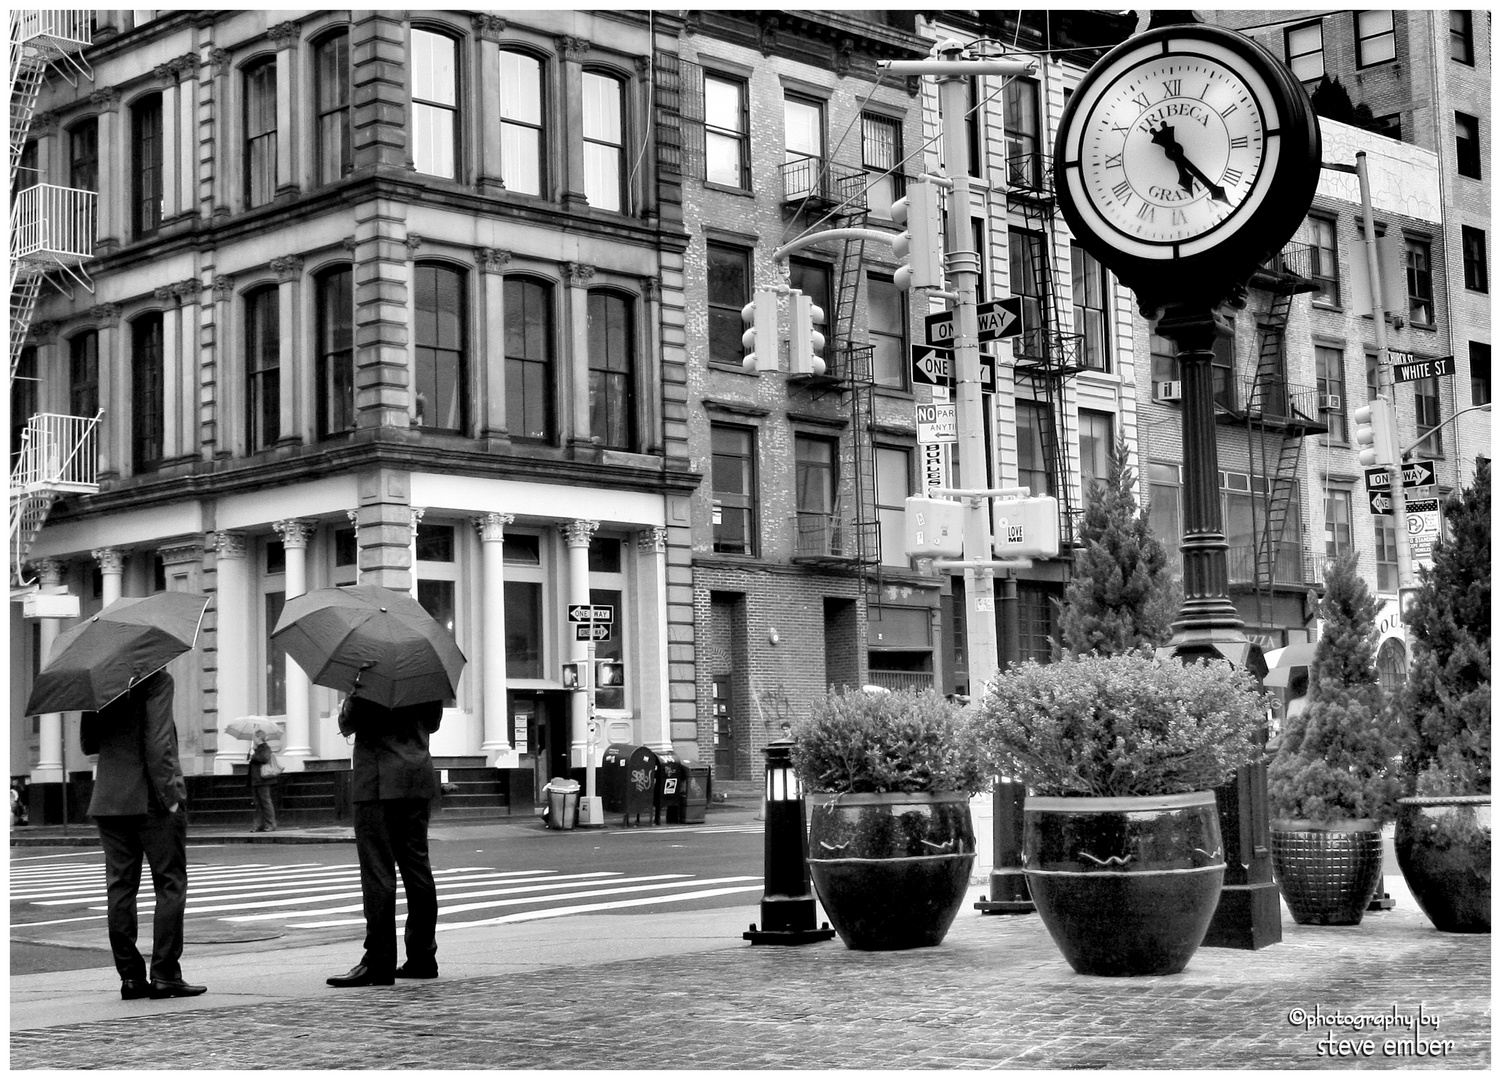 Suits in Drizzle and a Grand Clock - a Tribeca Moment